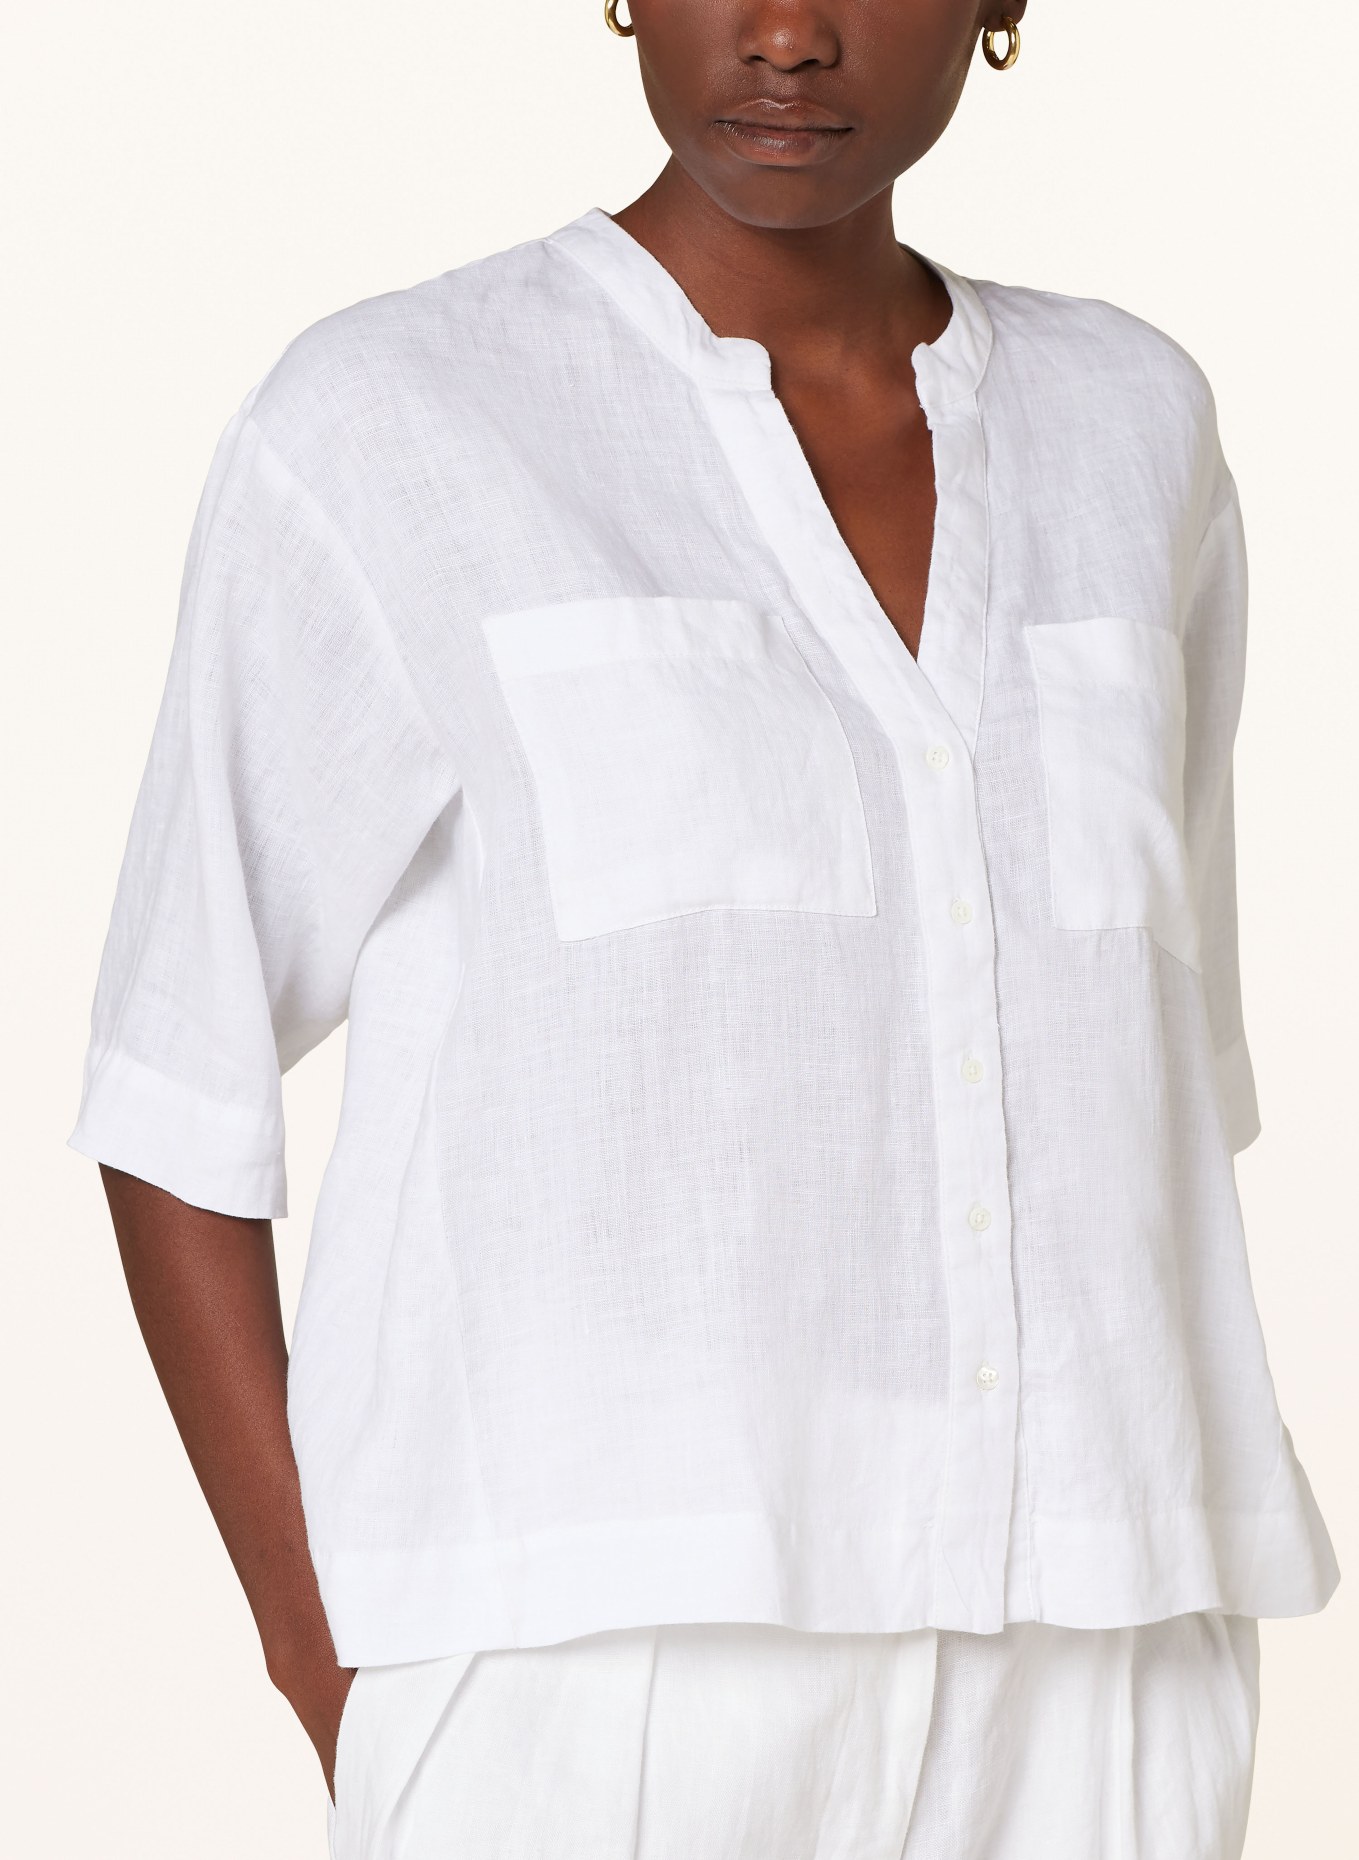 TONNO & PANNA Linen blouse with 3/4 sleeves, Color: WHITE (Image 4)